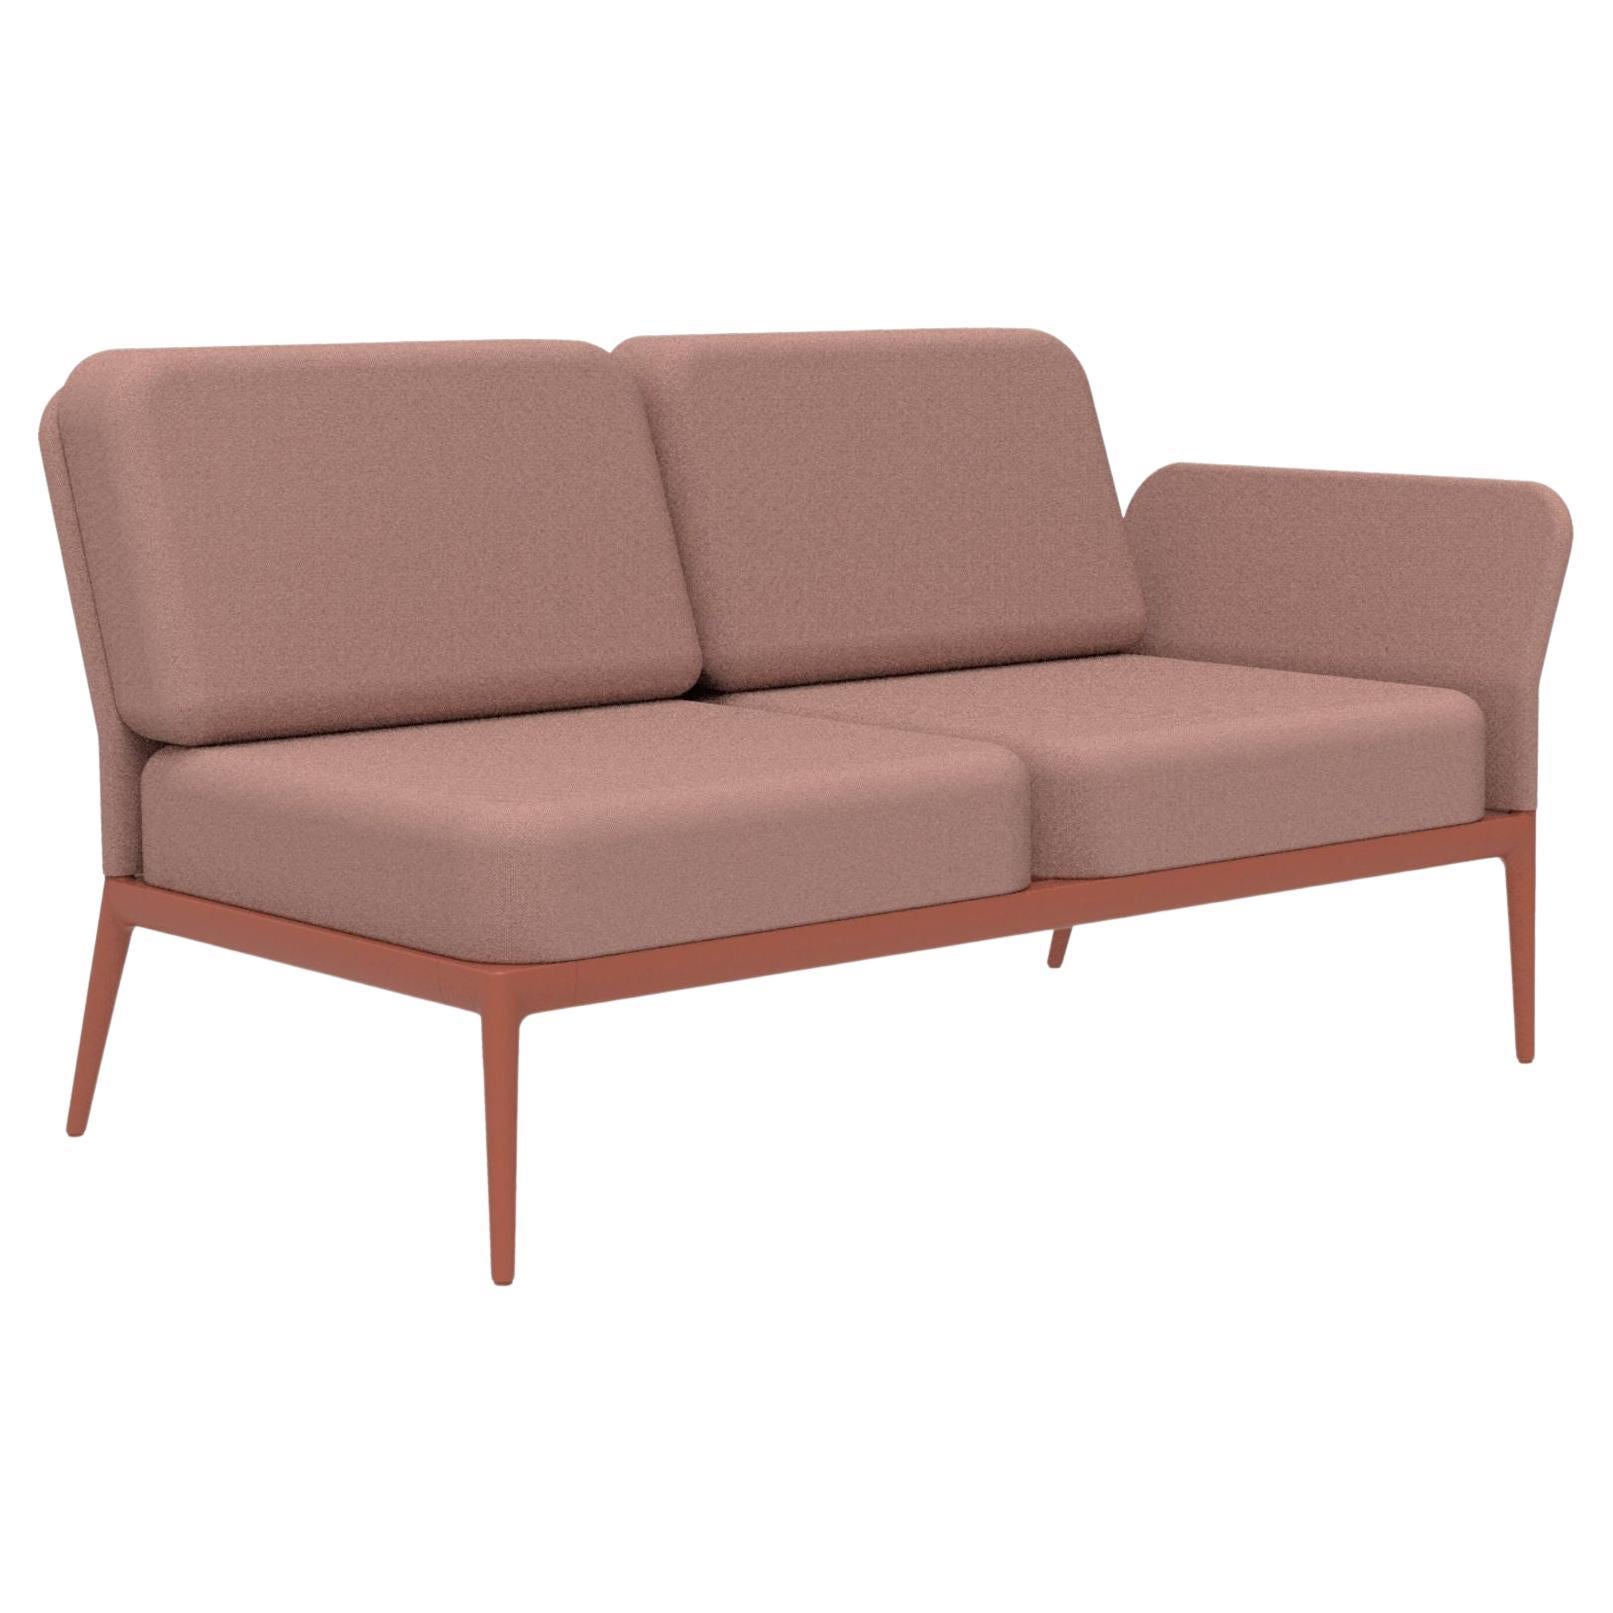 Cover Salmon Double Left Modular Sofa by MOWEE For Sale